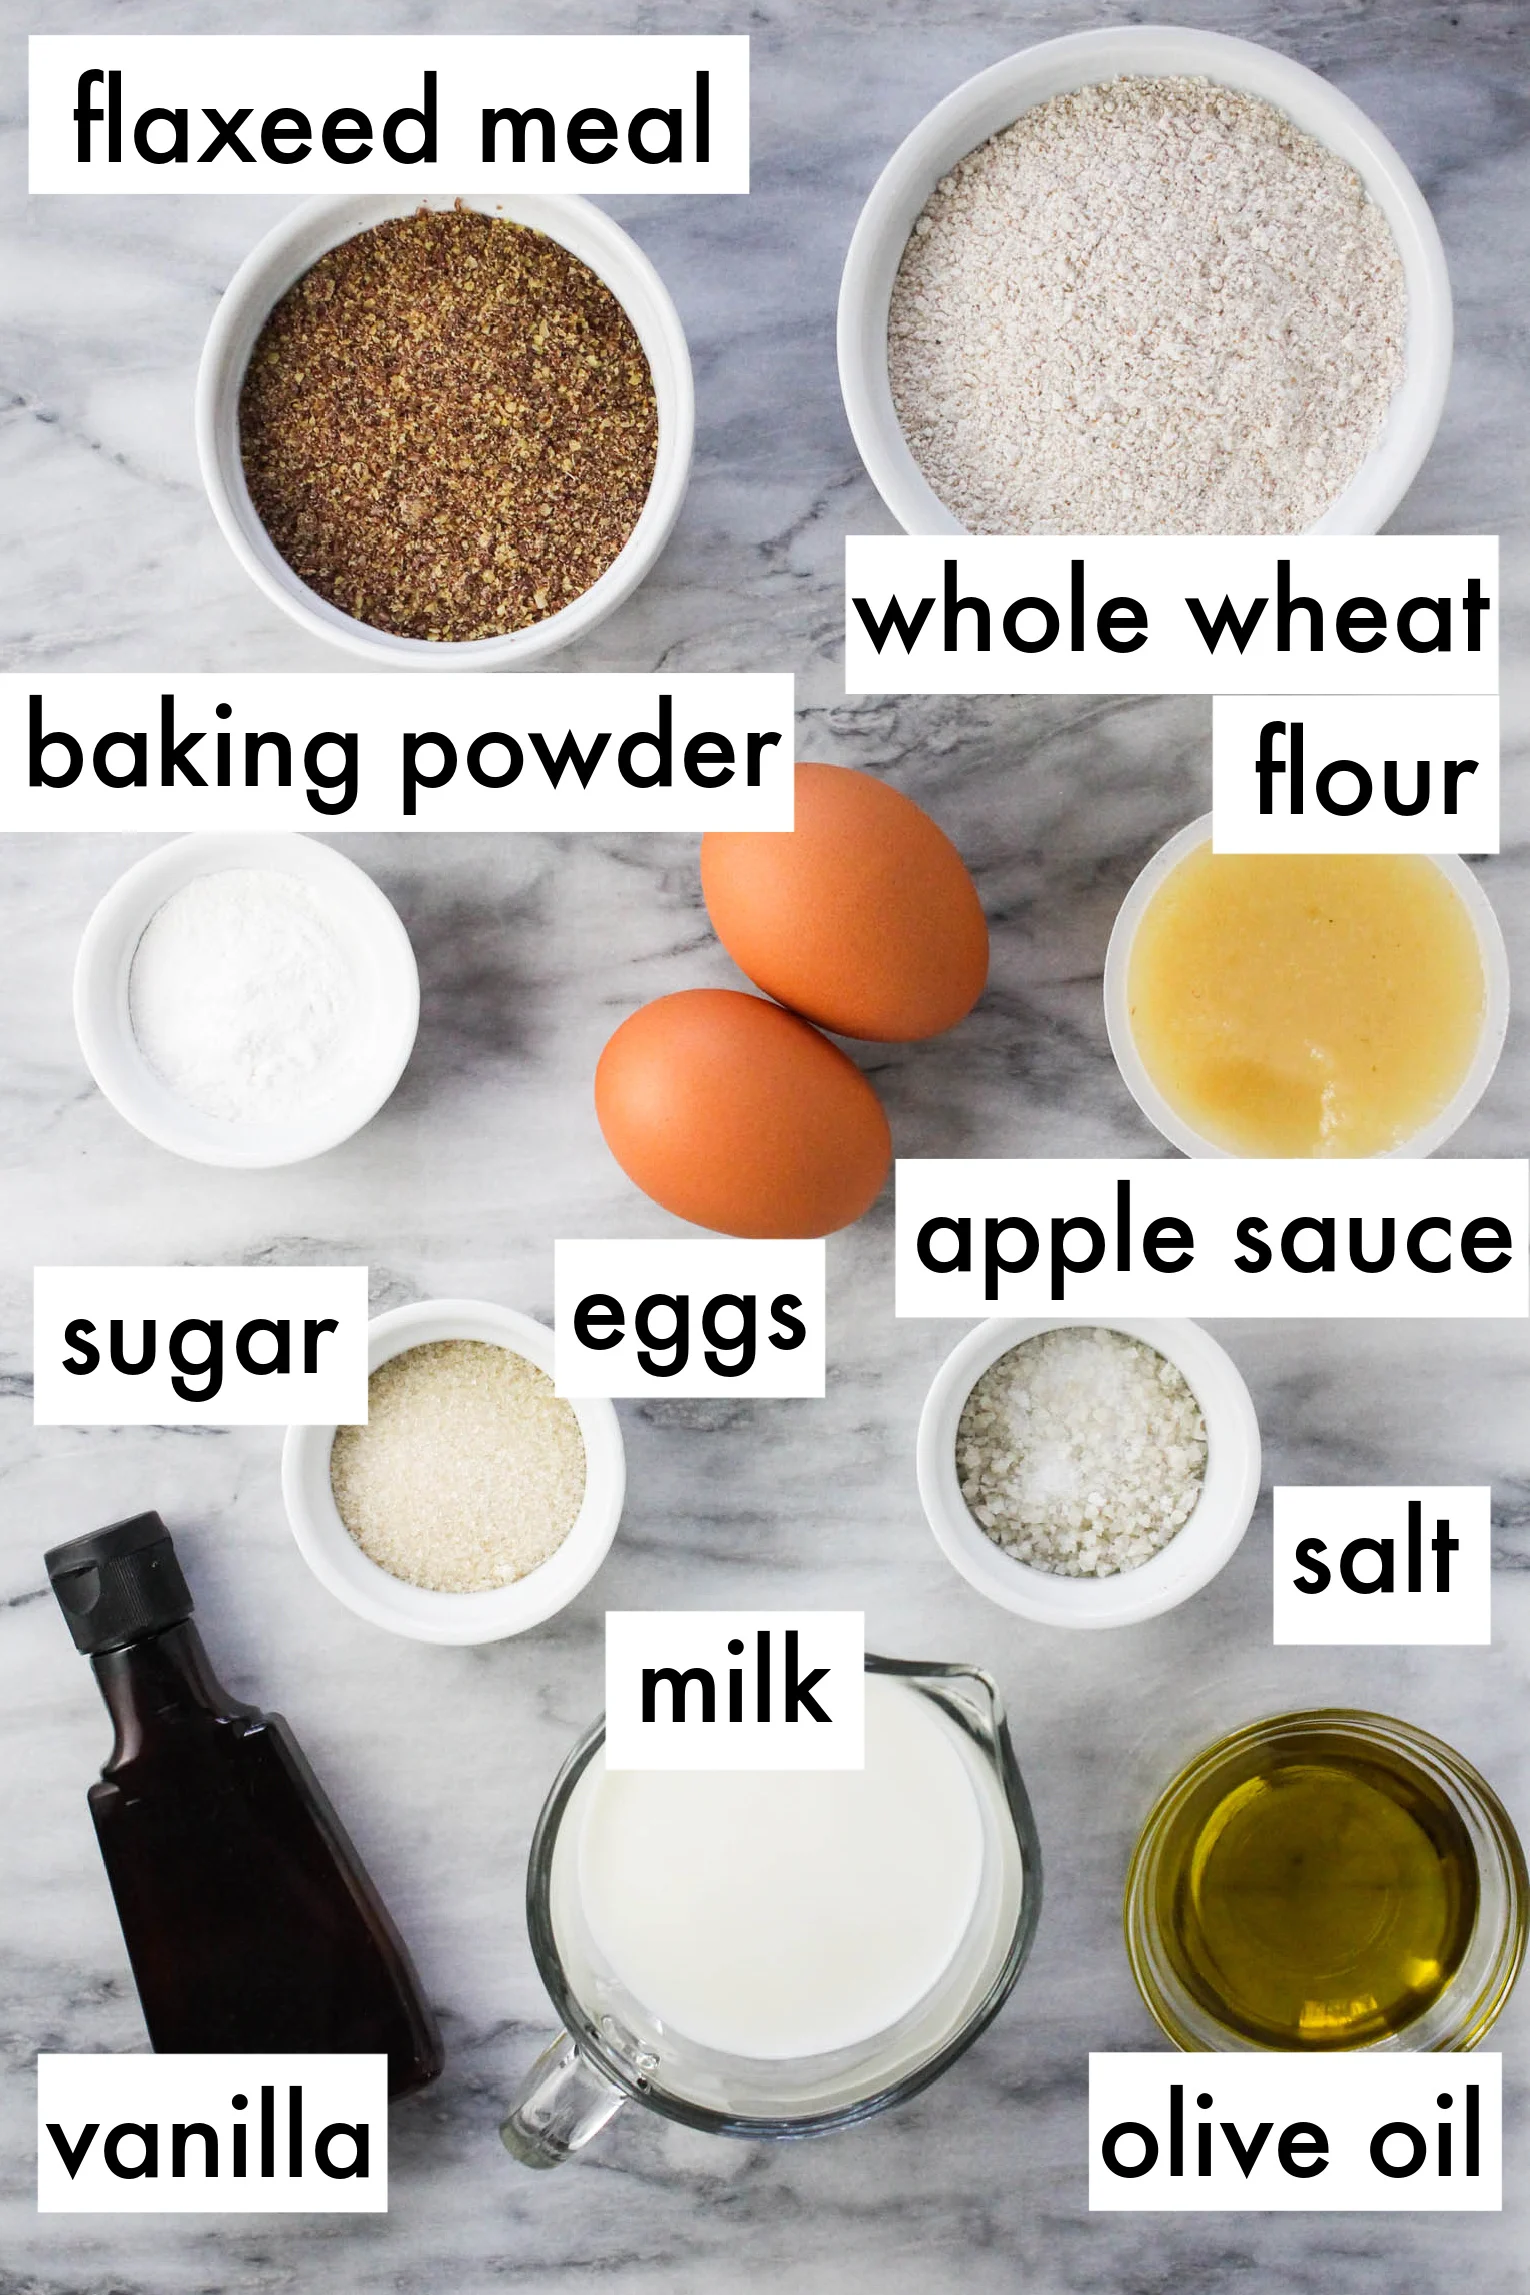 The ingredients for the recipe dispayed on marble background. The ingredients are labeled as follows: flaxeed meal, whole wheat flour, baking powder, sugar, eggs, apple sauce, vanilla, milk, olive oil.